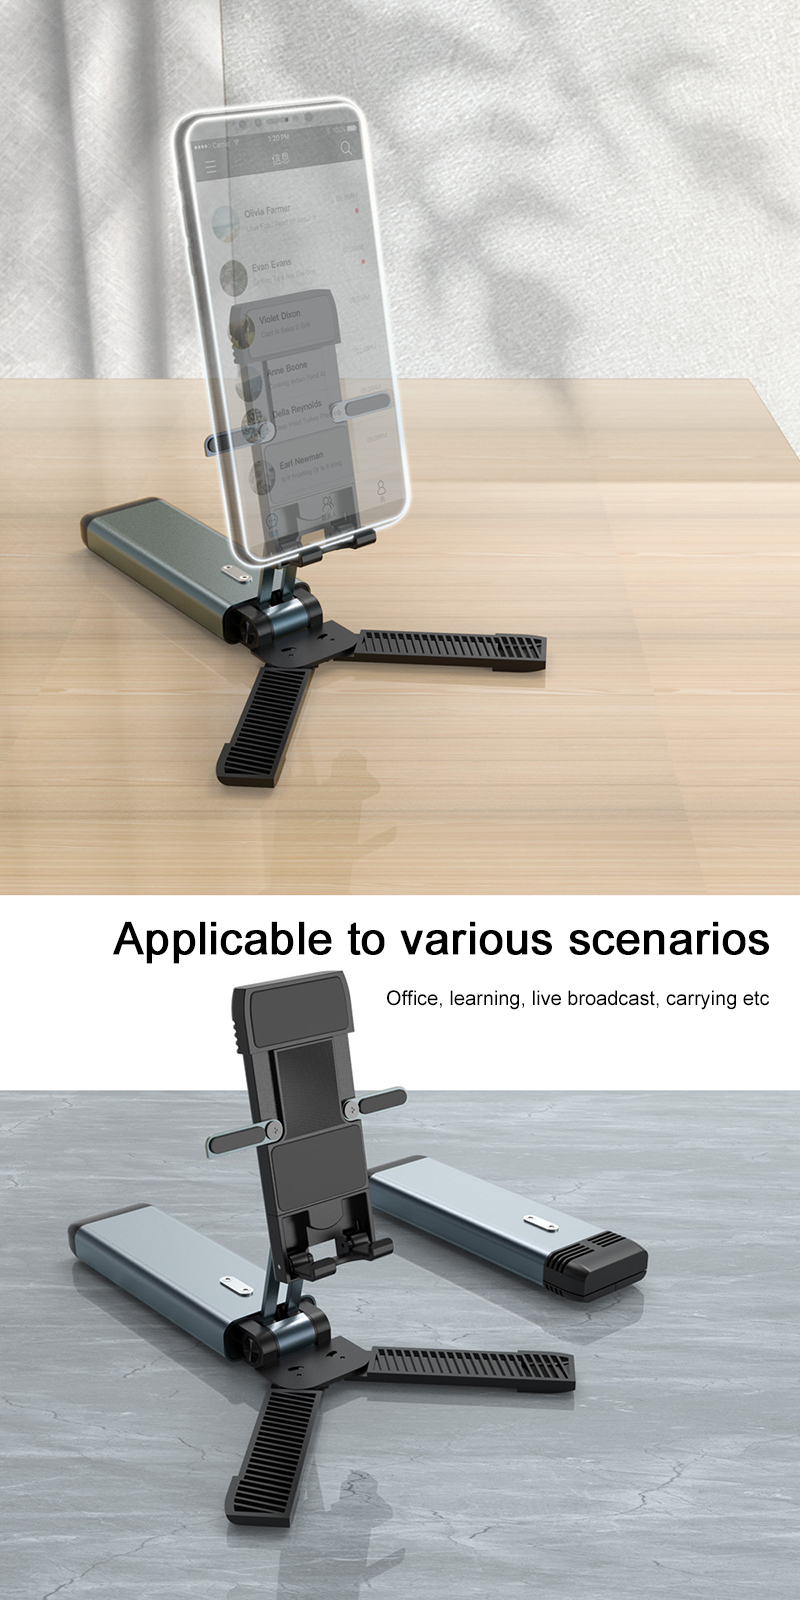 Bakeey-Portable-Foldable-Tablet-Phone-Holder-Online-Learning-Live-Streaming-Desktop-Tripod-Stand-For-1822557-3